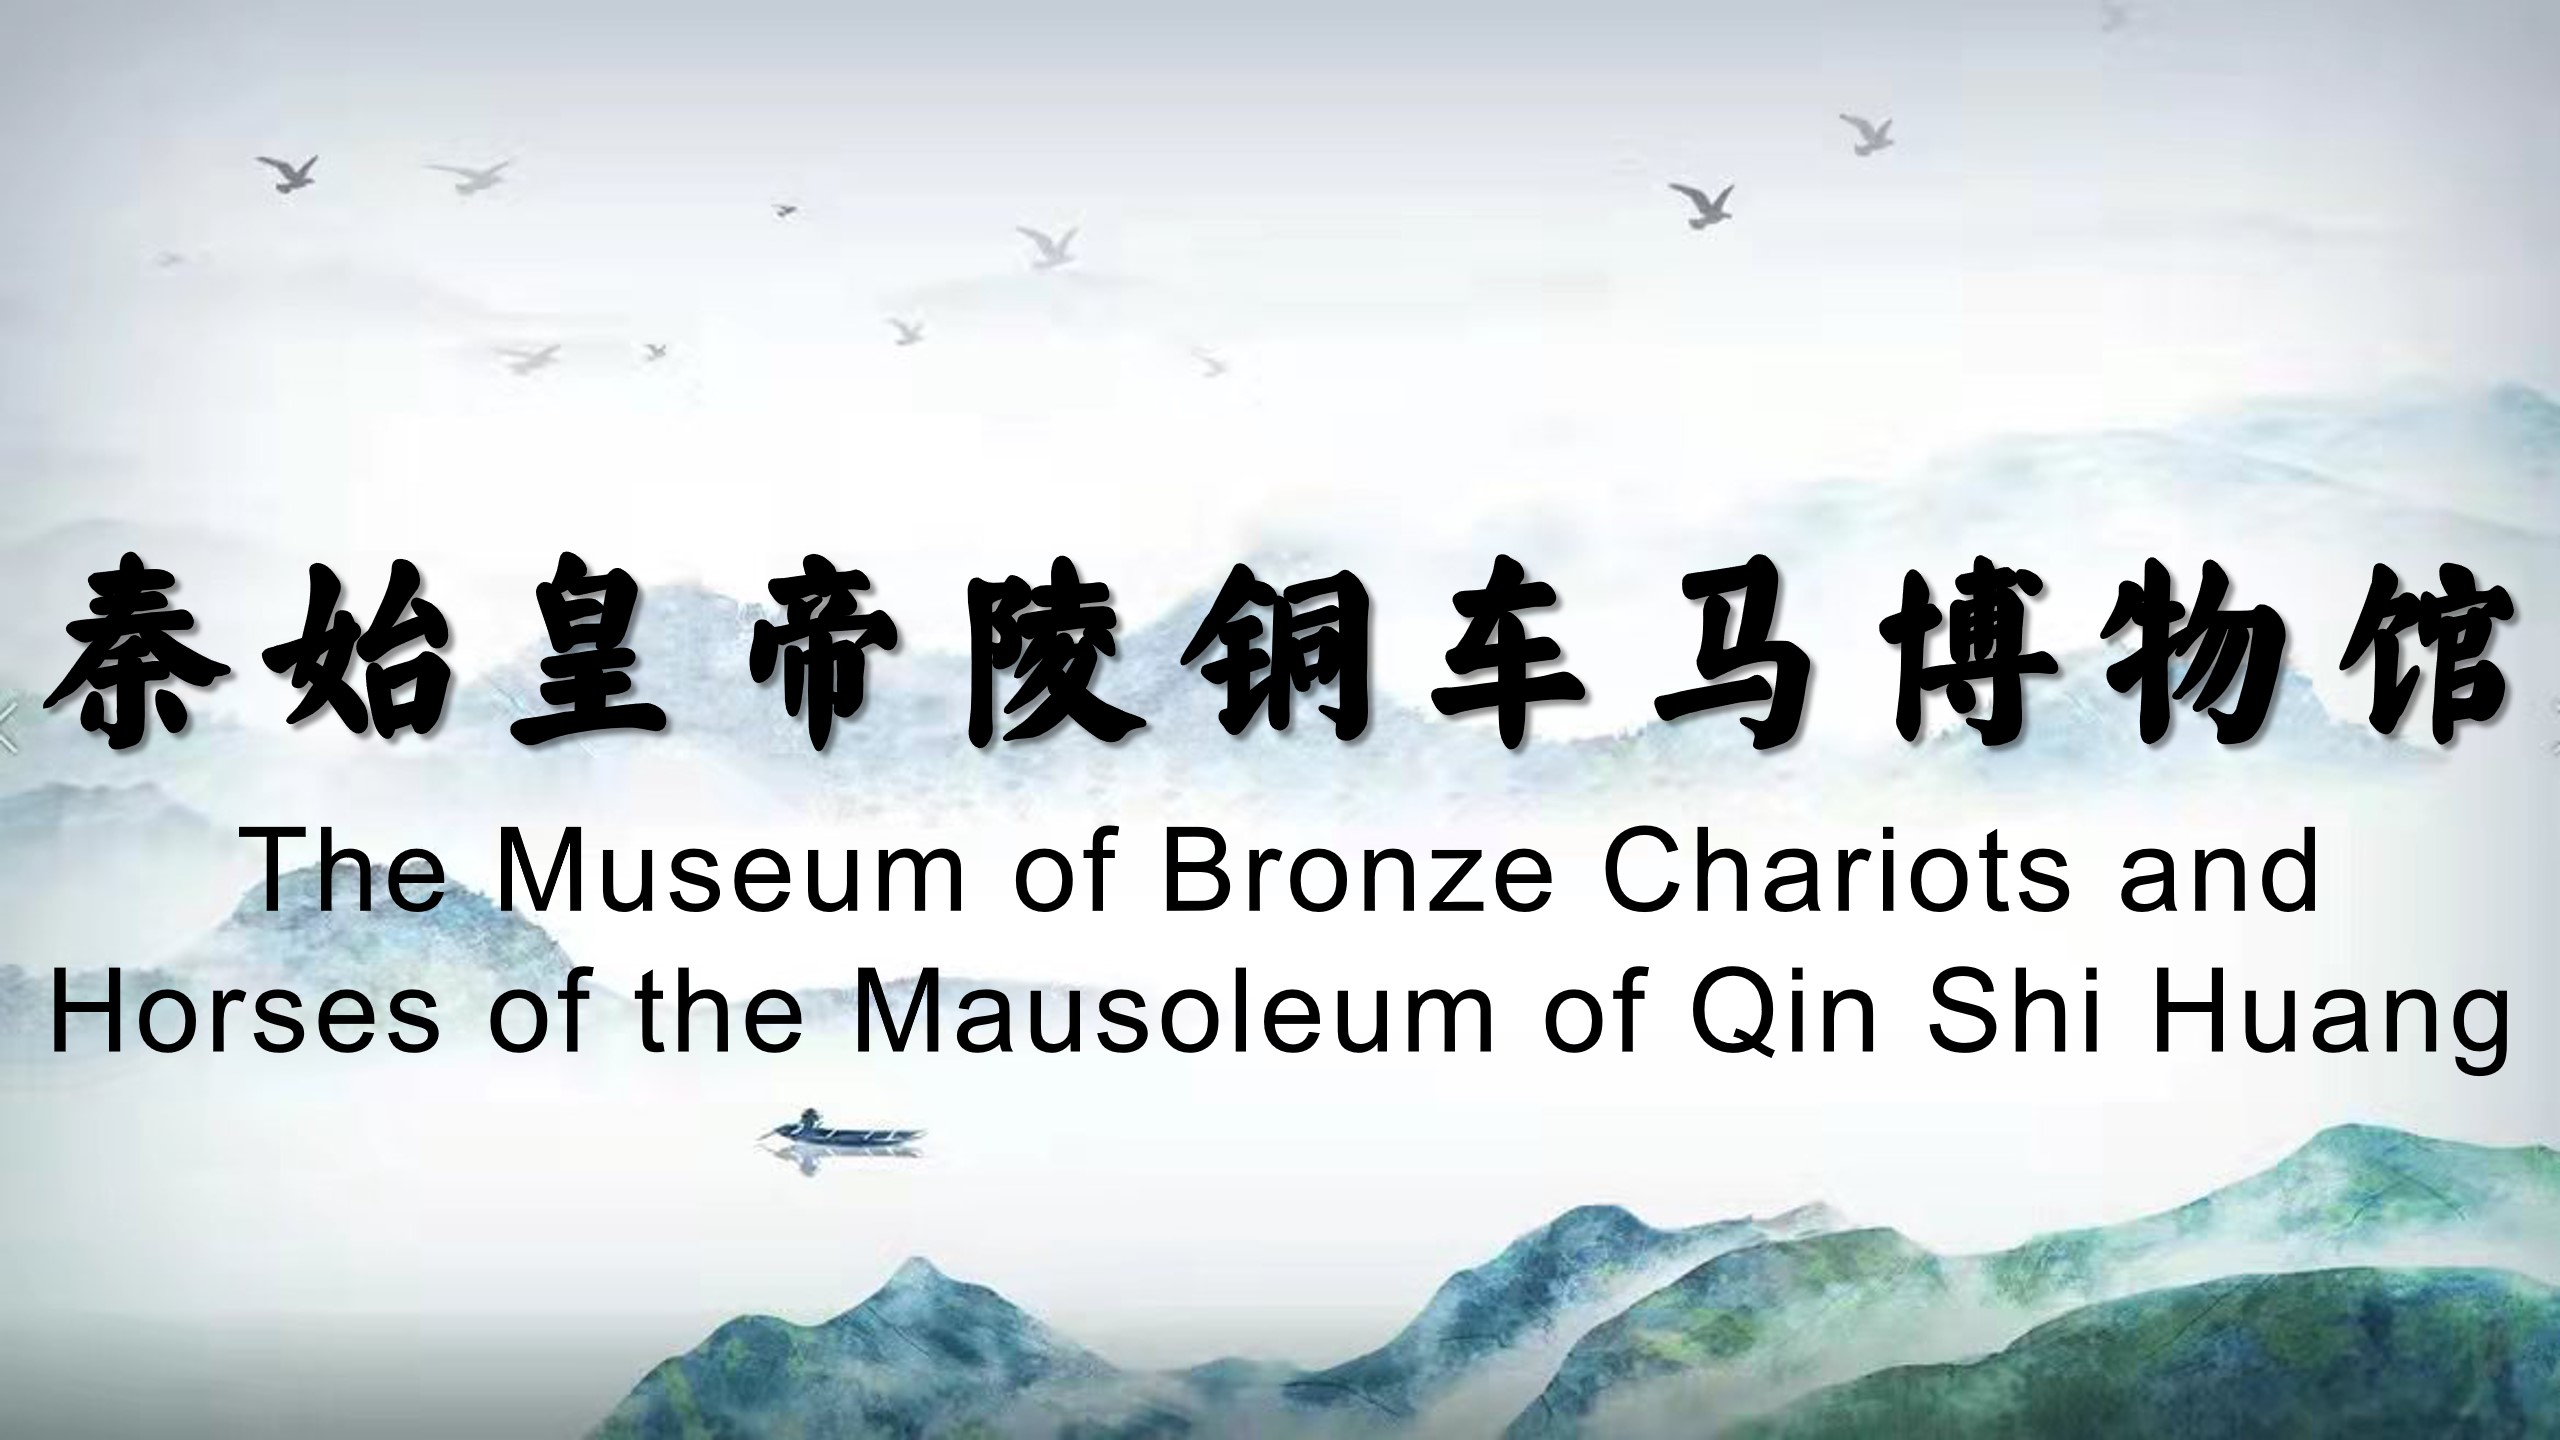 The Museum of Bronze Chariots and Horses of the Mausoleum of Qin Shi Huang